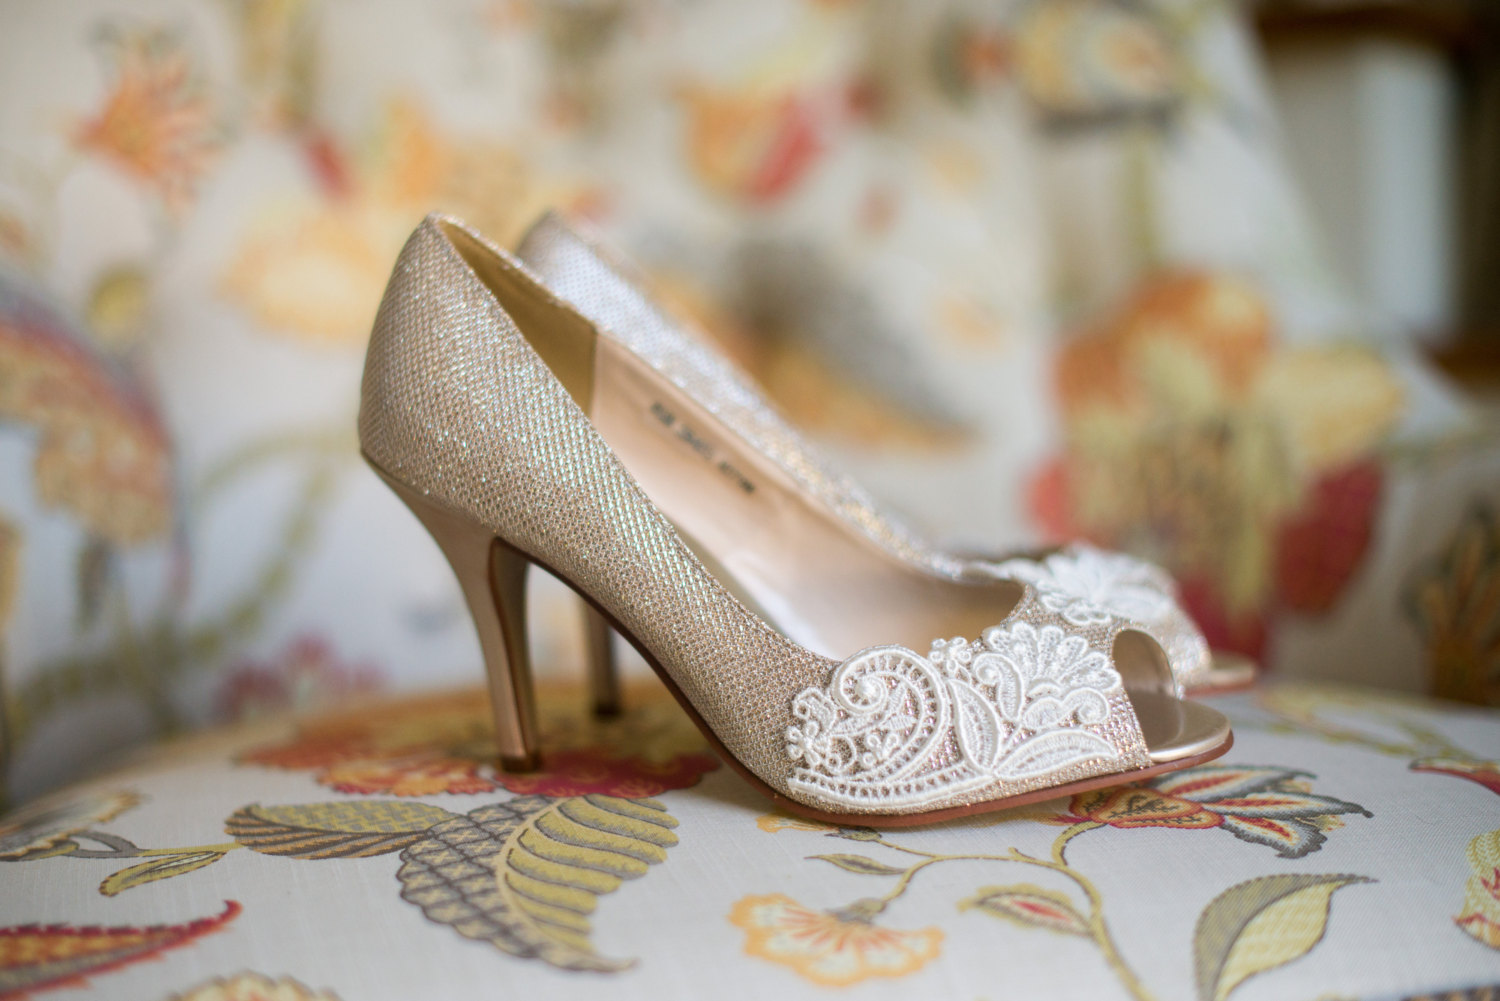 gold champagne silver wedding heels with lace - 9 Romantically Vintage Wedding Accessory Ideas